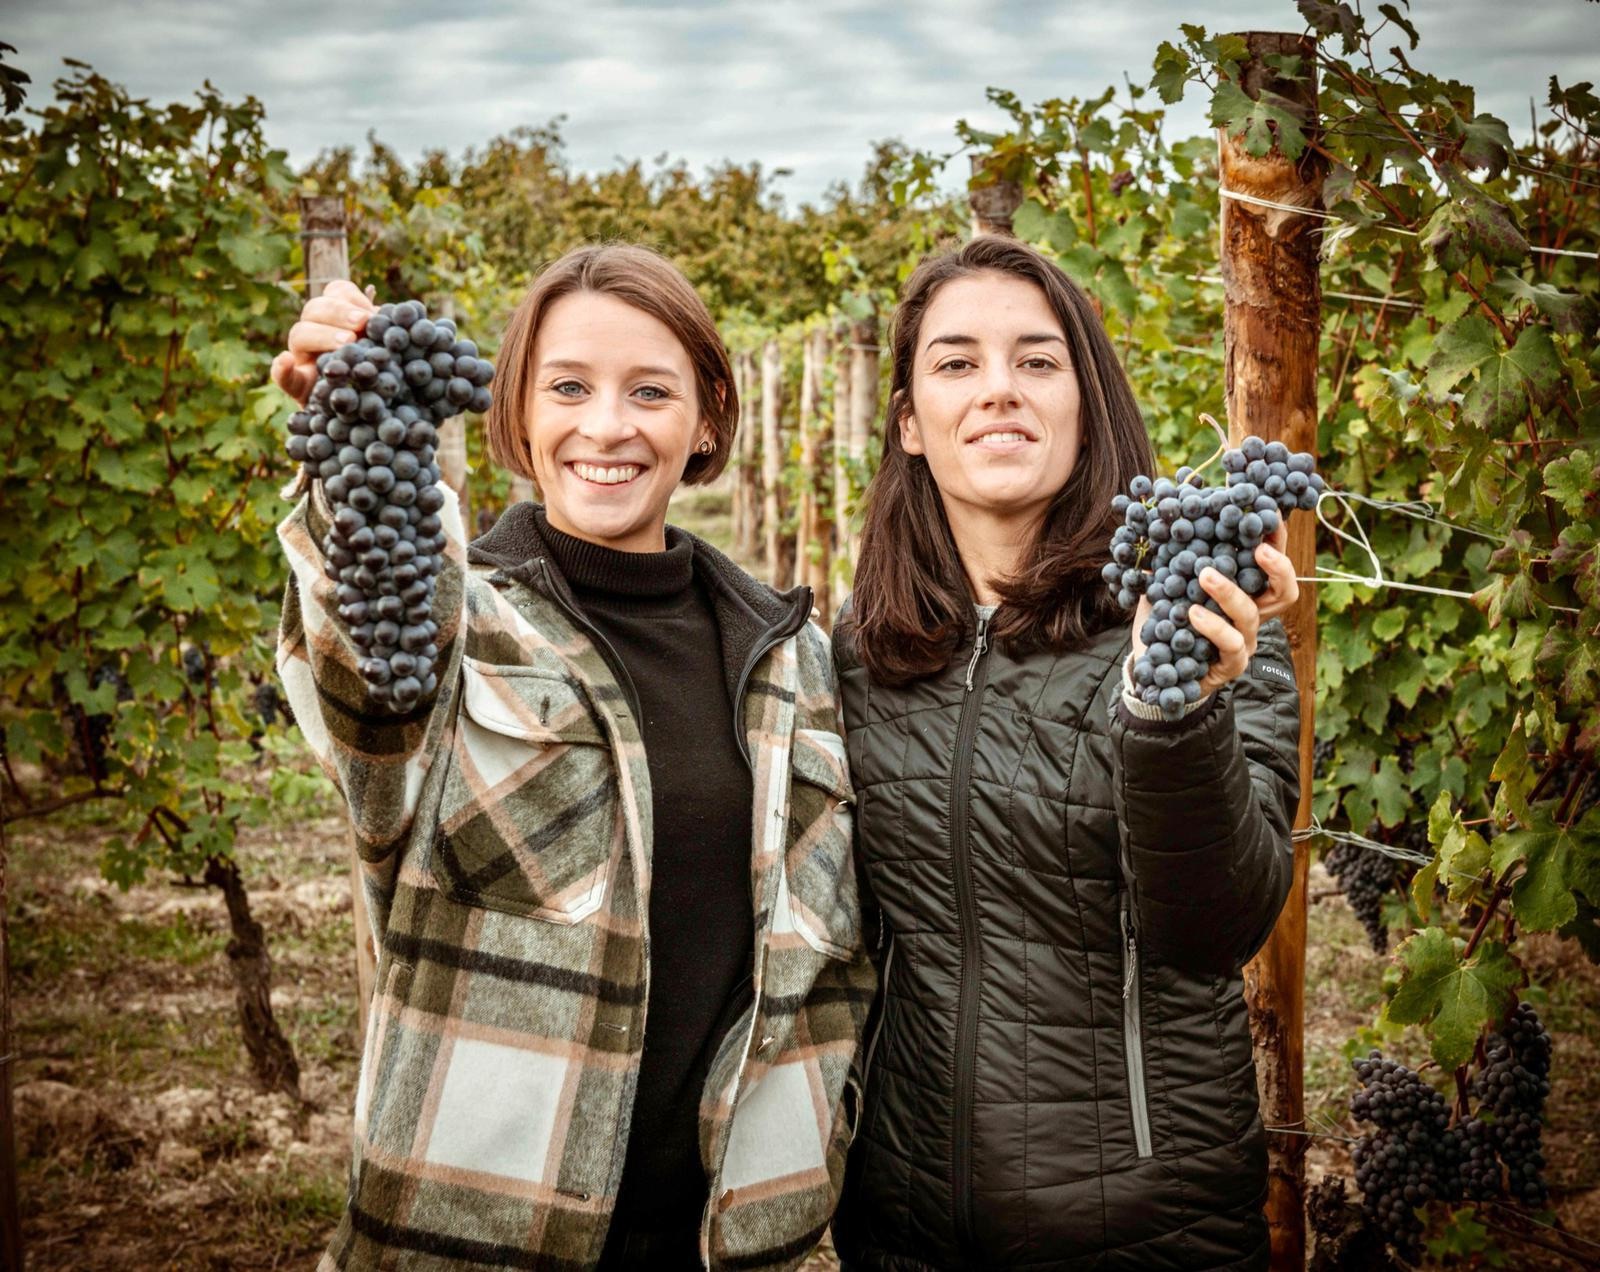 Interview with Giovanna and Serena Bagnasco from Agricola Brandini